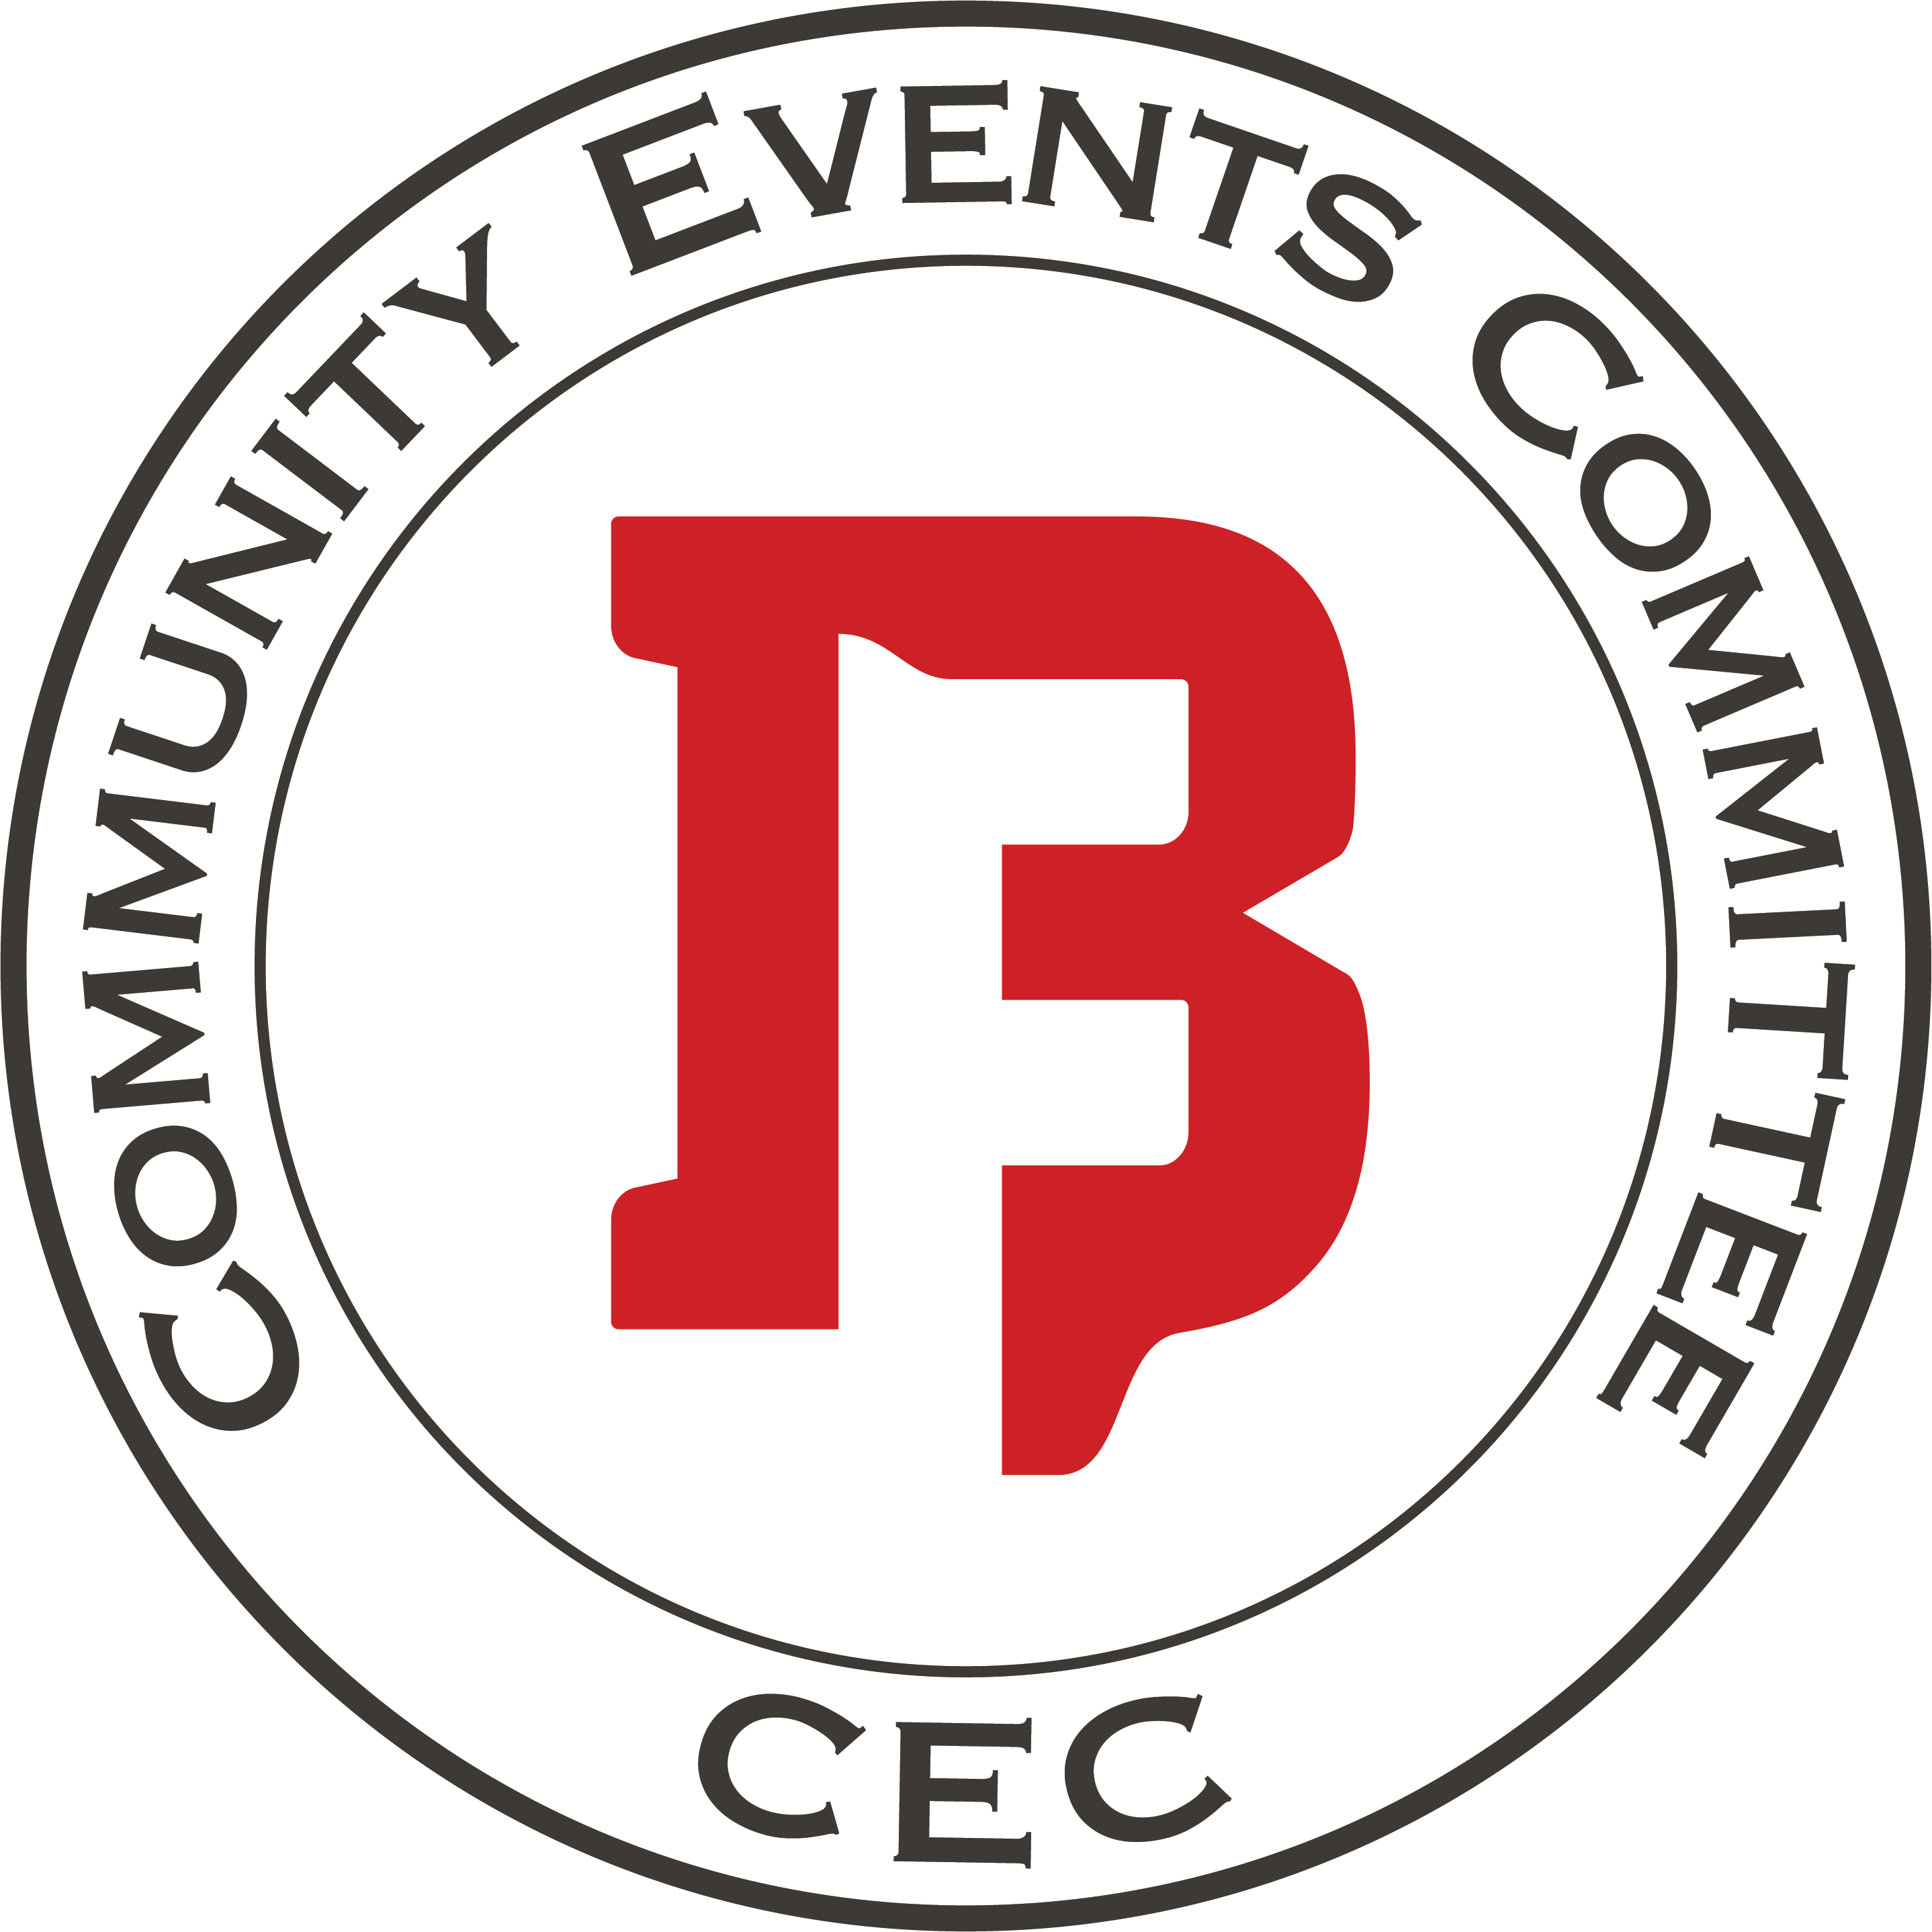 Community Events Committee